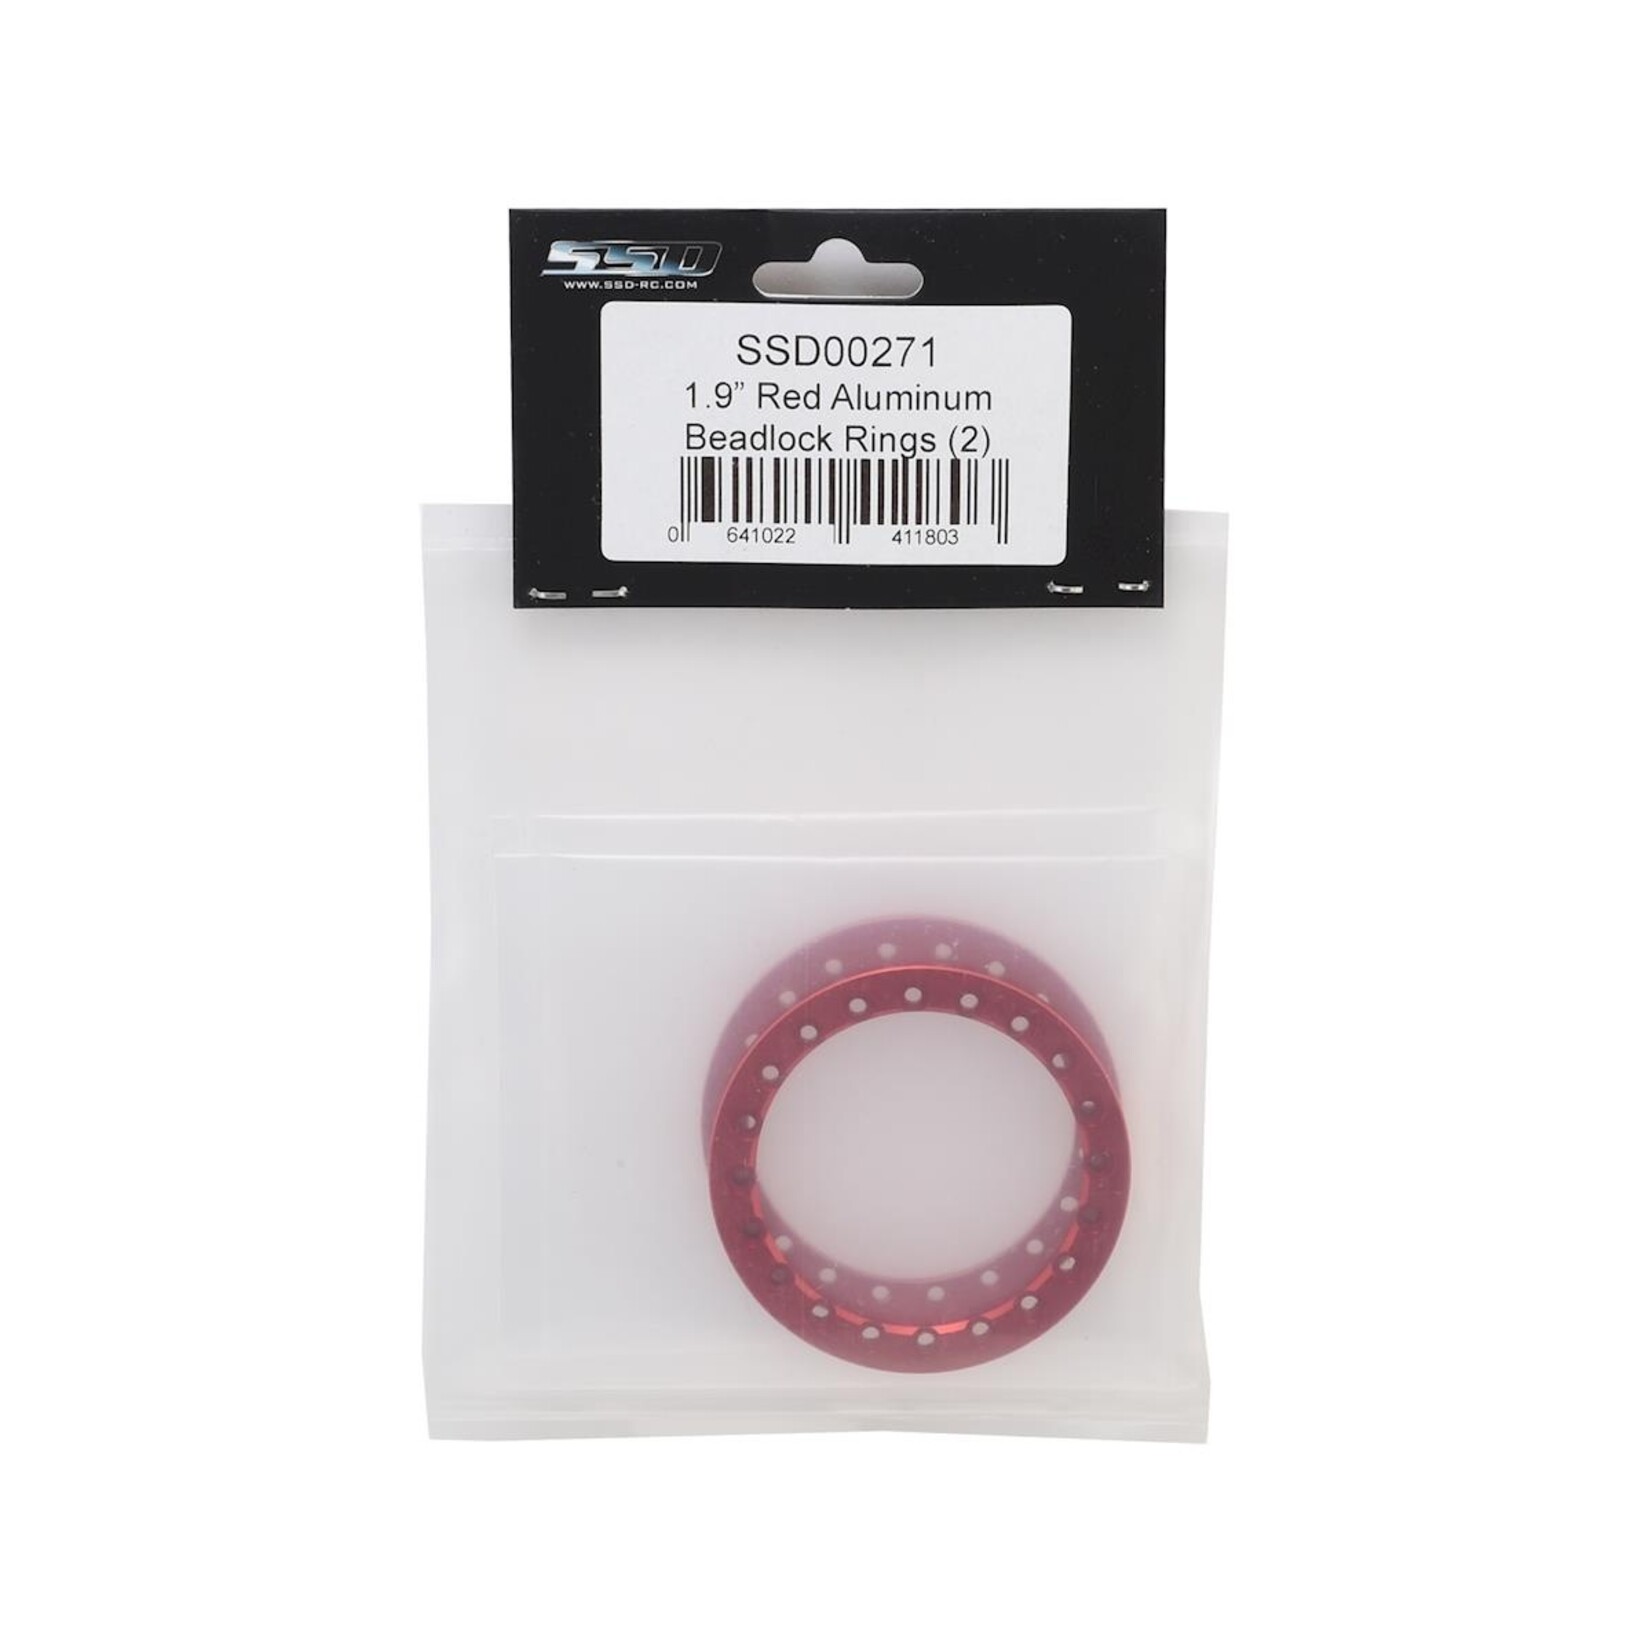 SSD RC SSD RC 1.9” Aluminum Beadlock Rings (Red) (2) #SSD00271